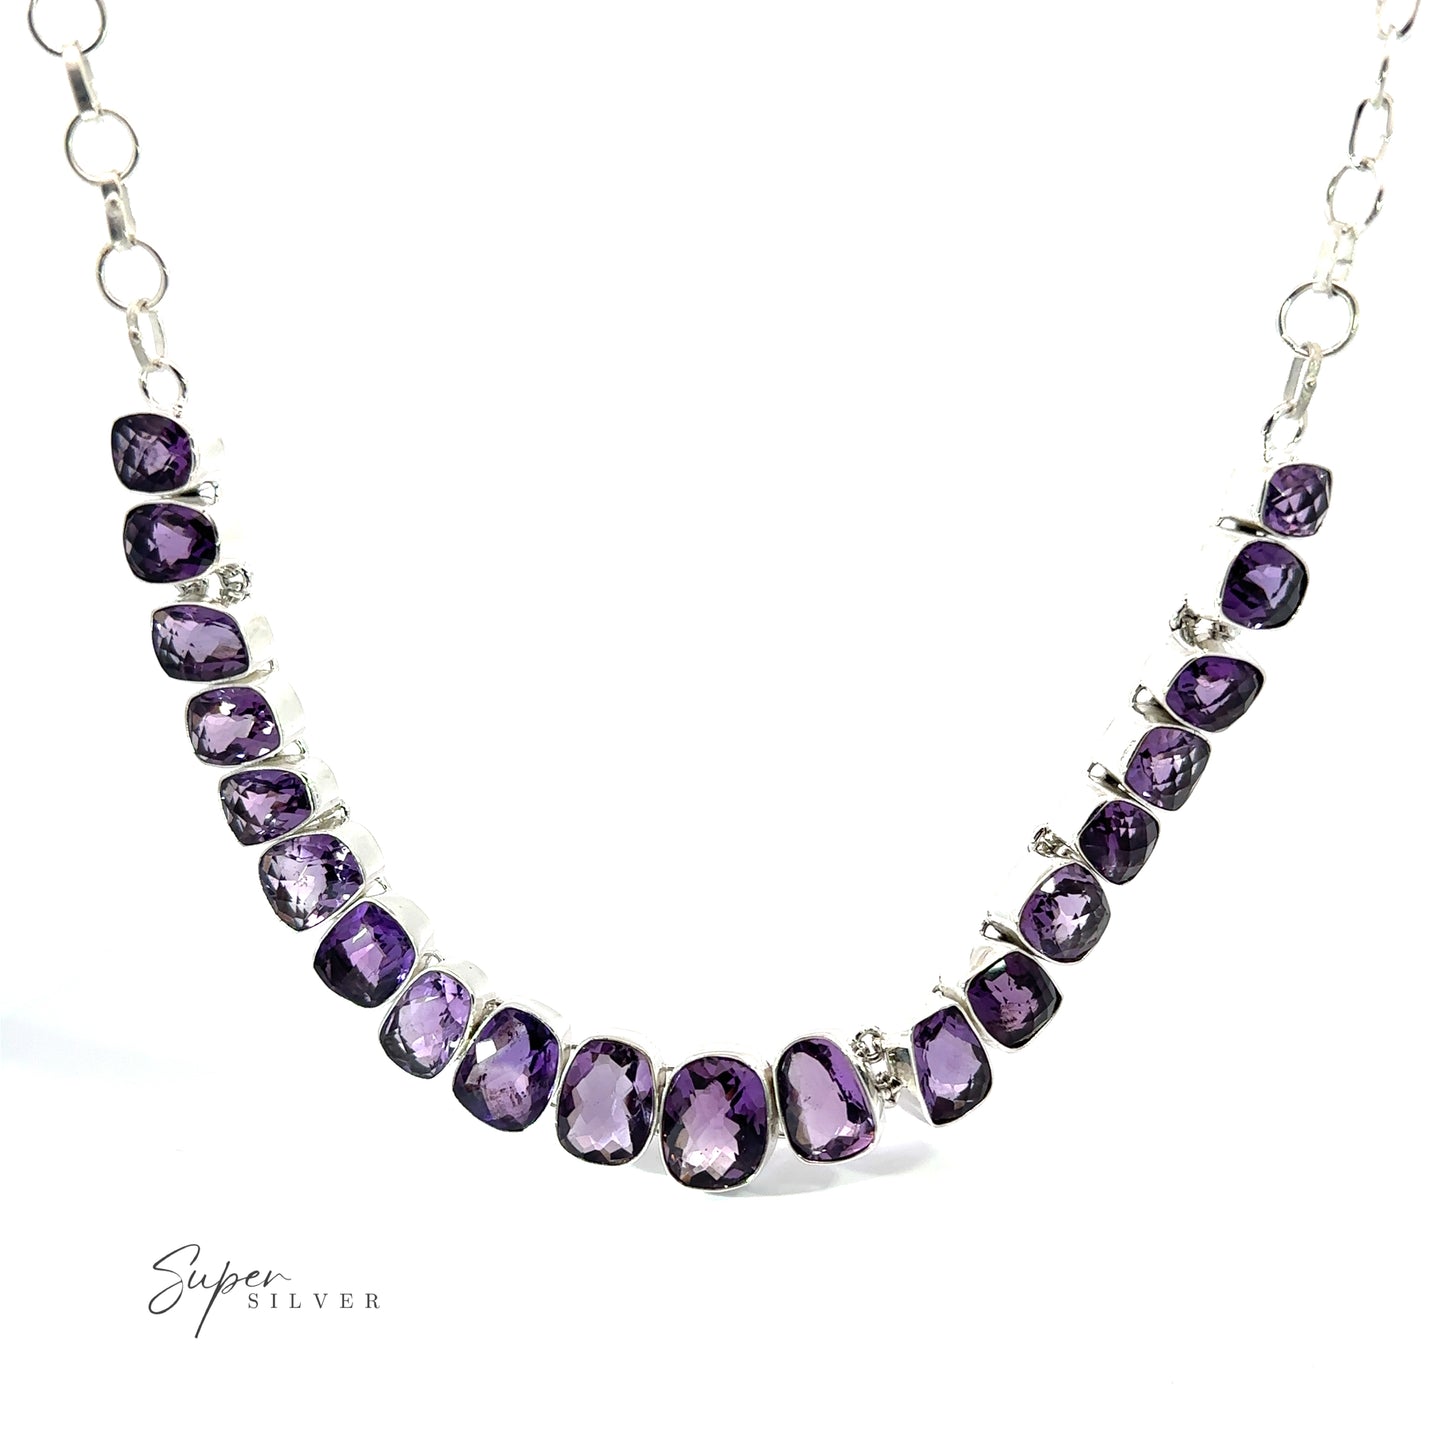 
                  
                    Statement Gemstone Necklace featuring a series of oval purple amethyst gemstones set in silver linked together, with "Super Silver" branding in the bottom-left corner.
                  
                